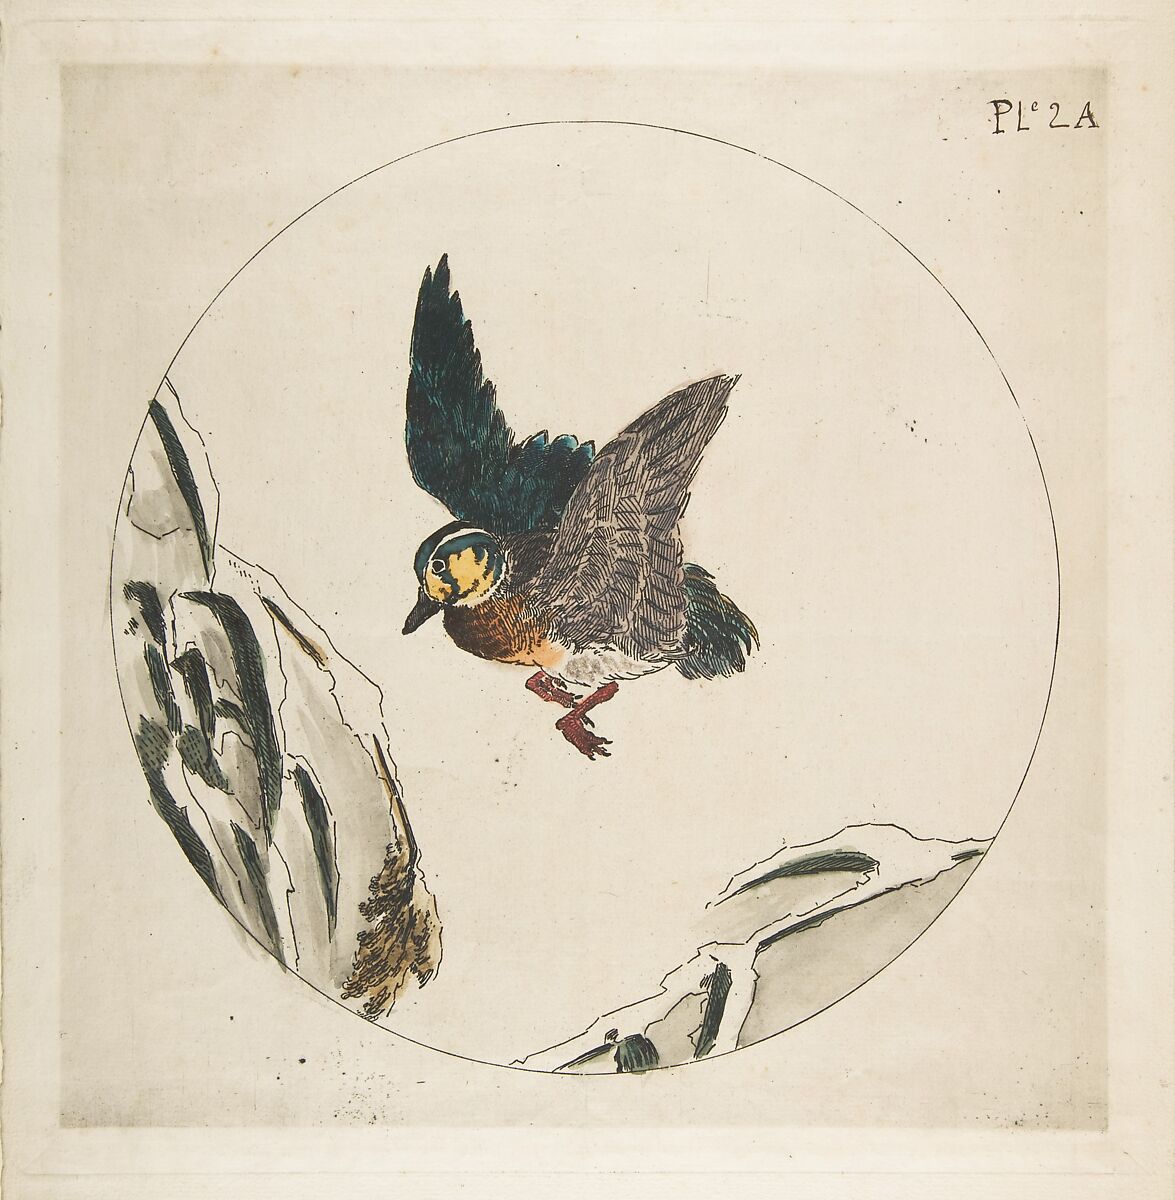 Decoration for a Plate: A Duck flying over Snow-covered Branches, Félix Bracquemond  French, Etching with watercolor